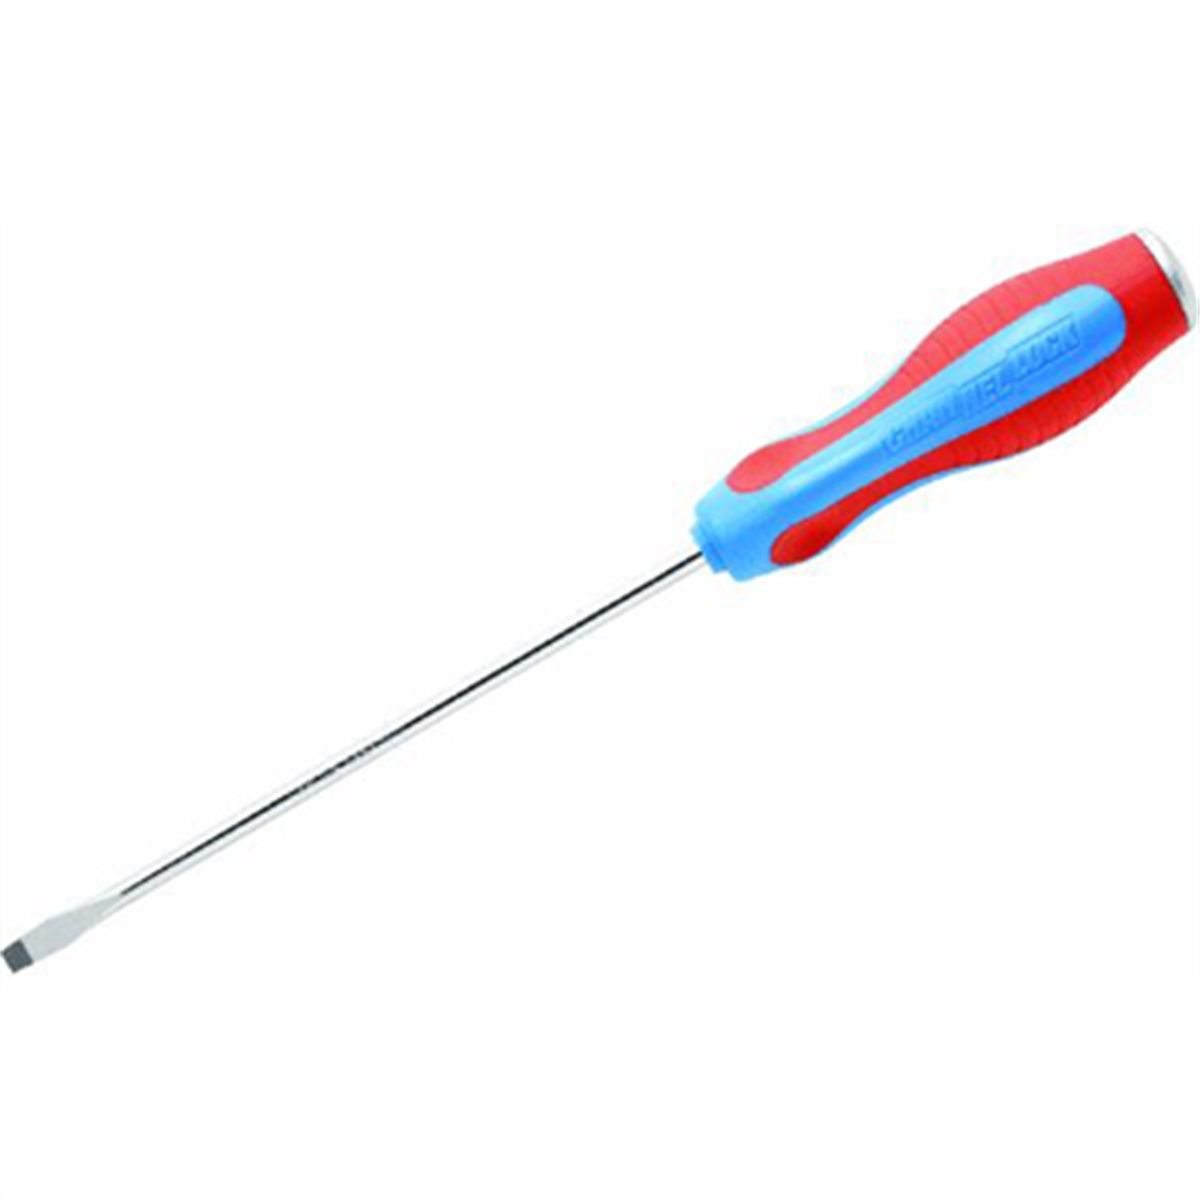 3/16" X 8" Blade Slotted Screwdriver